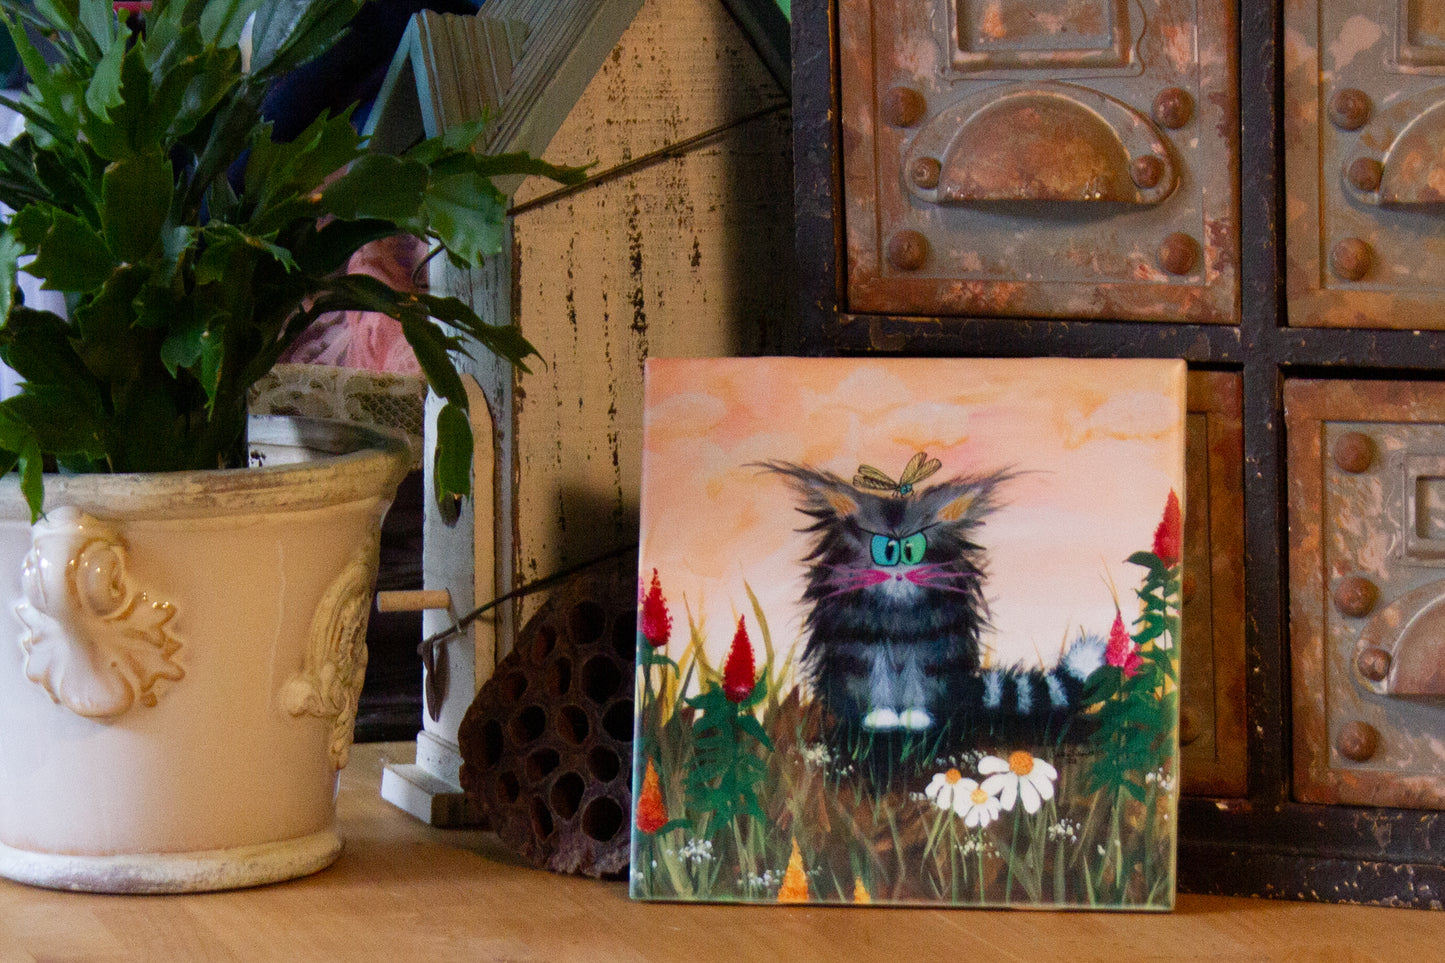 Cranky Cat with Celosia and Dragonfly - Ceramic Tile